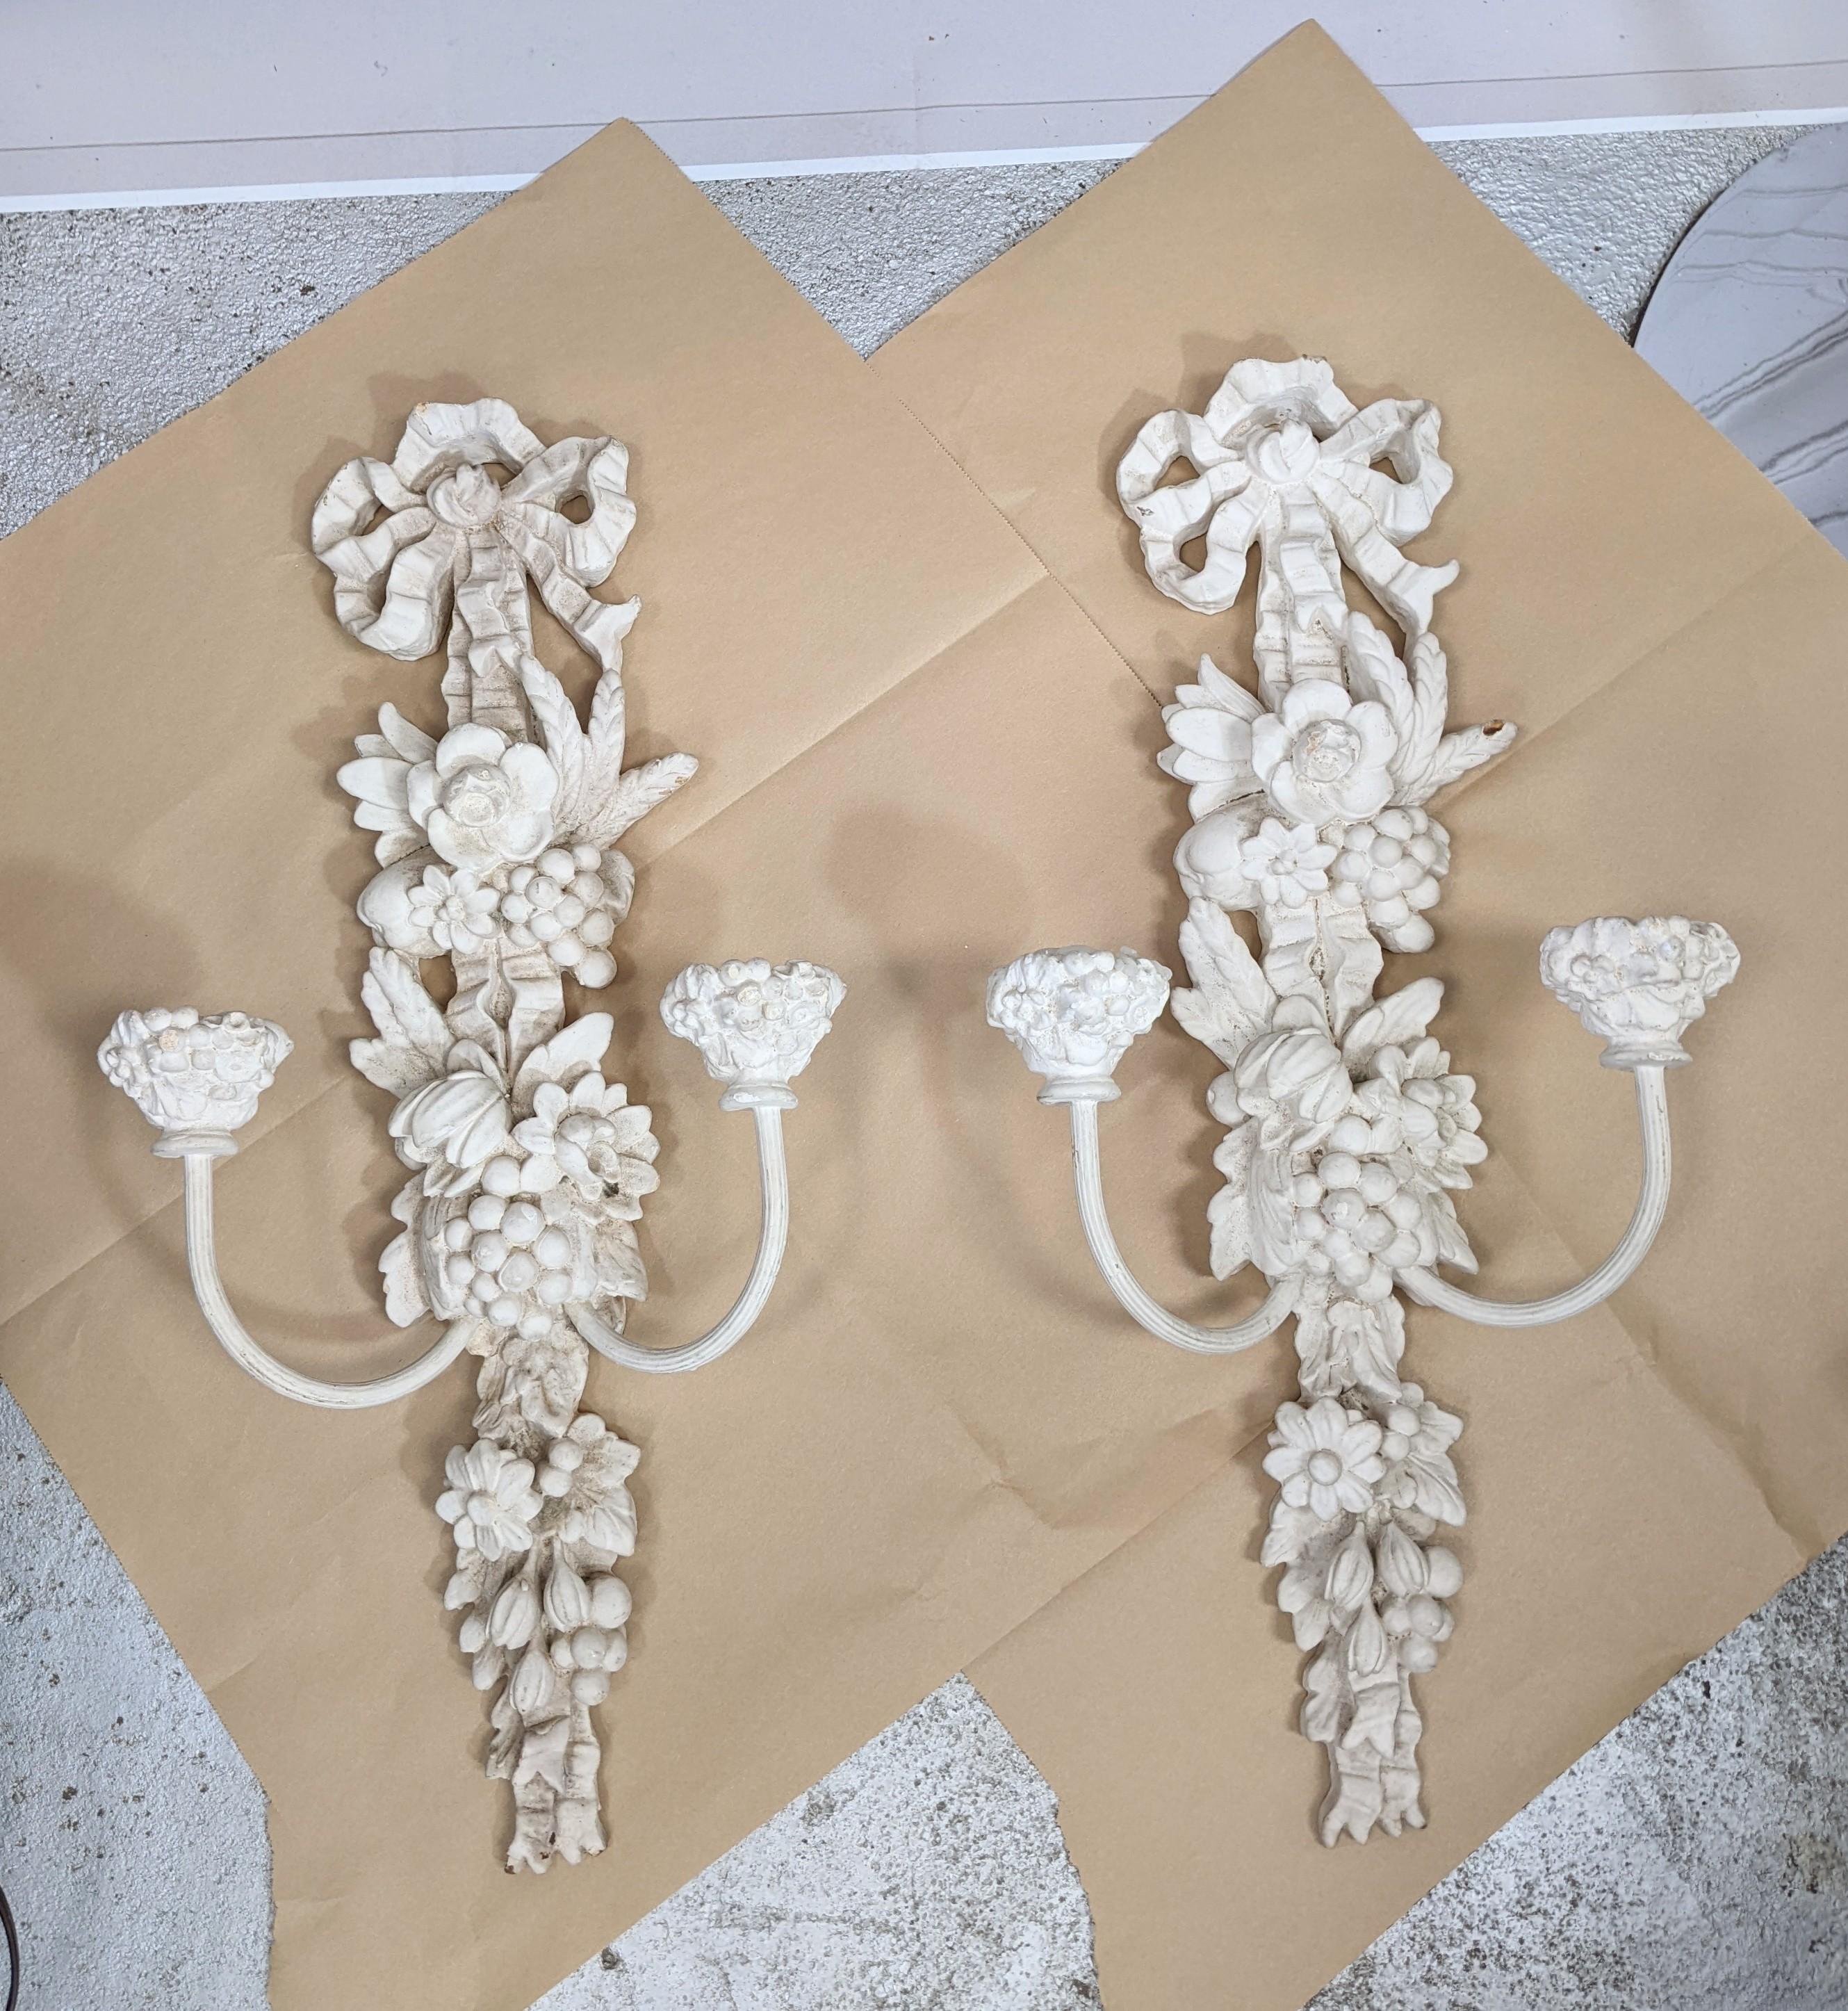 Pair of Hollywood Regency style plaster on wood wall candle sconces from the 1940's. Fully formed, dimensional motifs of fruit and flowers hang from ribbon bow motifs. Plaster molded on wood backing with enamel metal arms. 1940's USA.